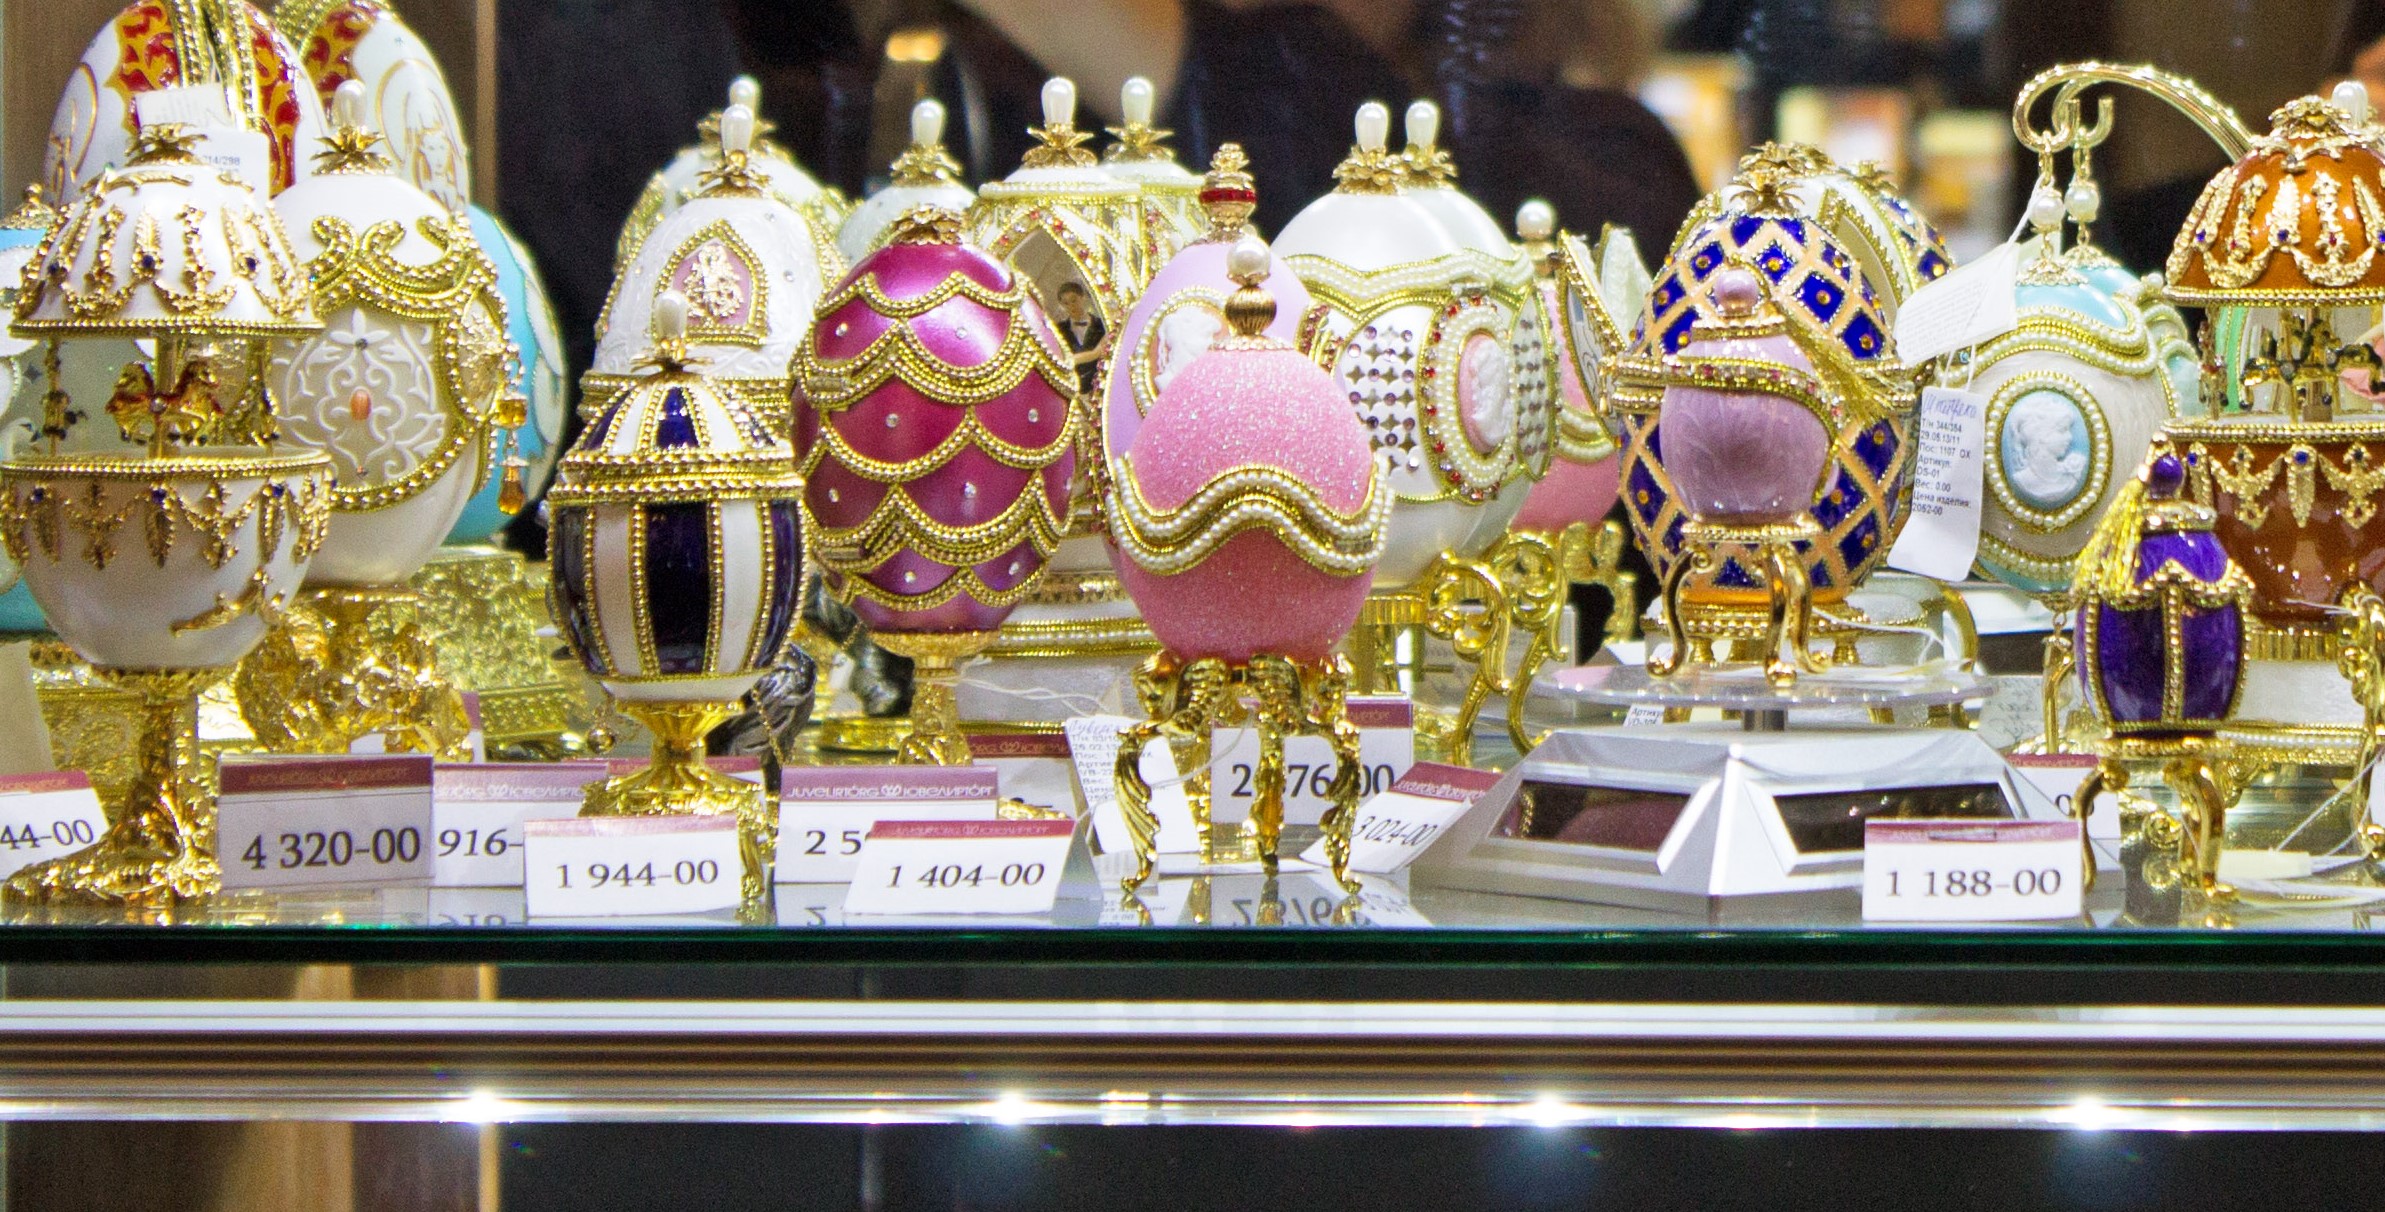 Faberge Museum, St. Petersburg, Russia